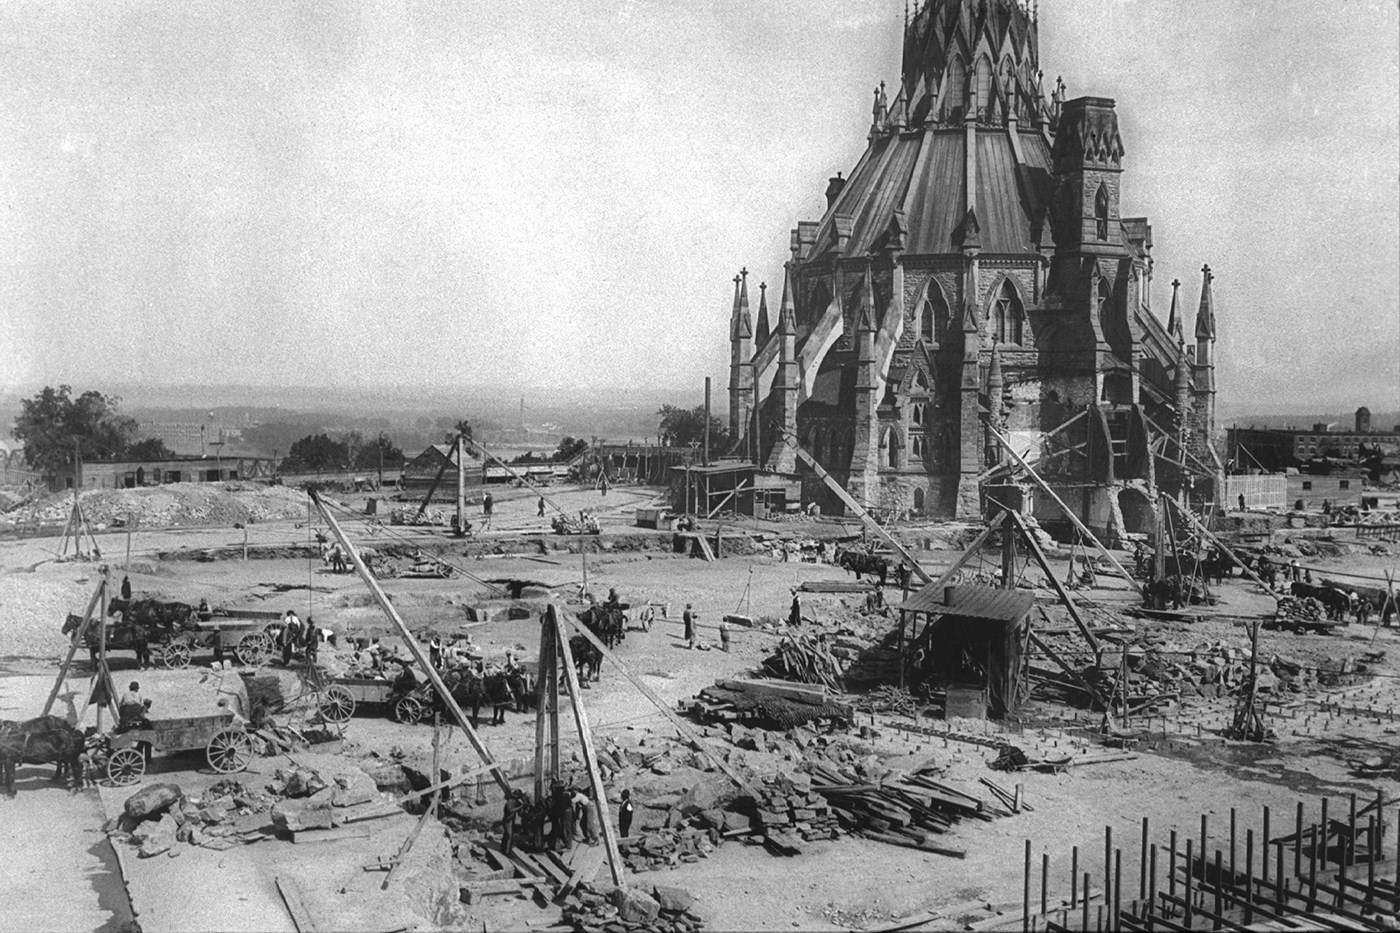 The Library of Parliament was the only part of the building to survive. By June 1916, the site had been cleared for reconstruction. (Photo credit: Library and Archives Canada)